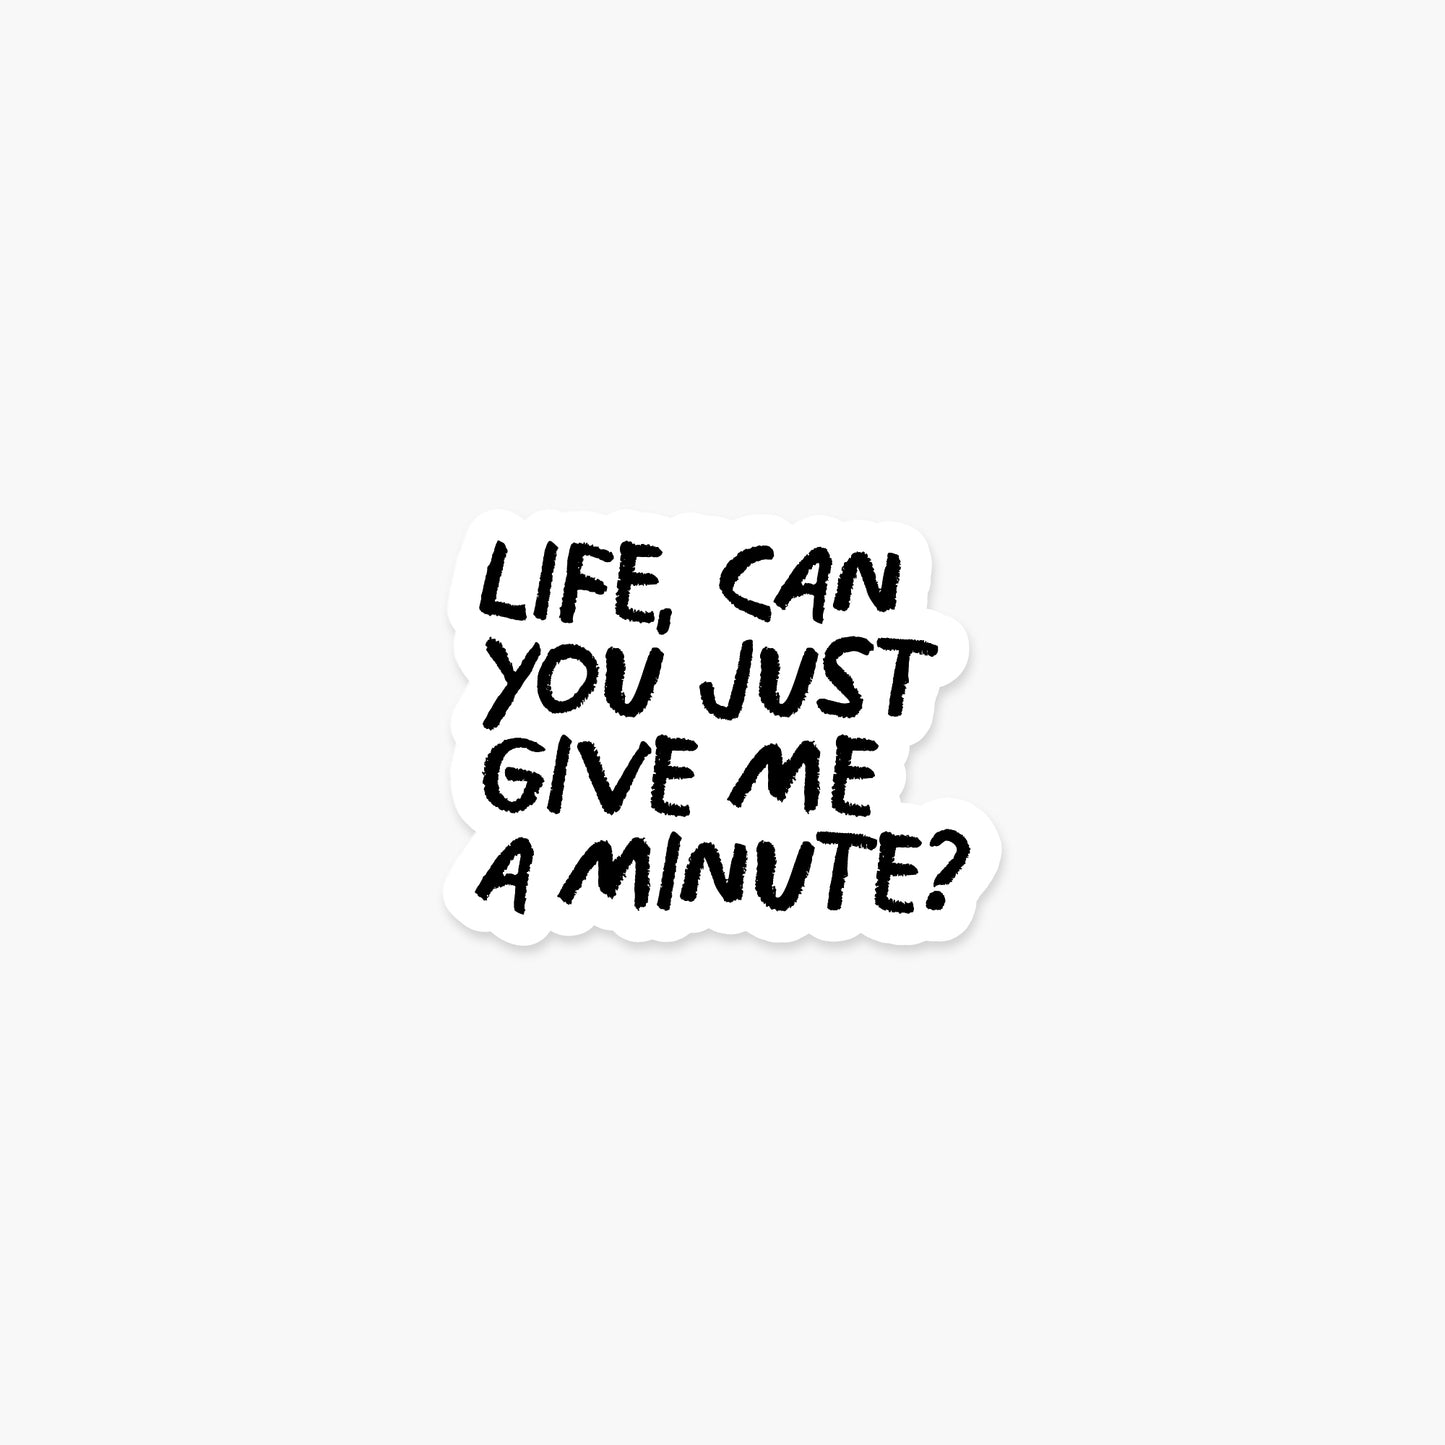 Life, can you just give me a minute? - Motivational Sticker | Footnotes Paper